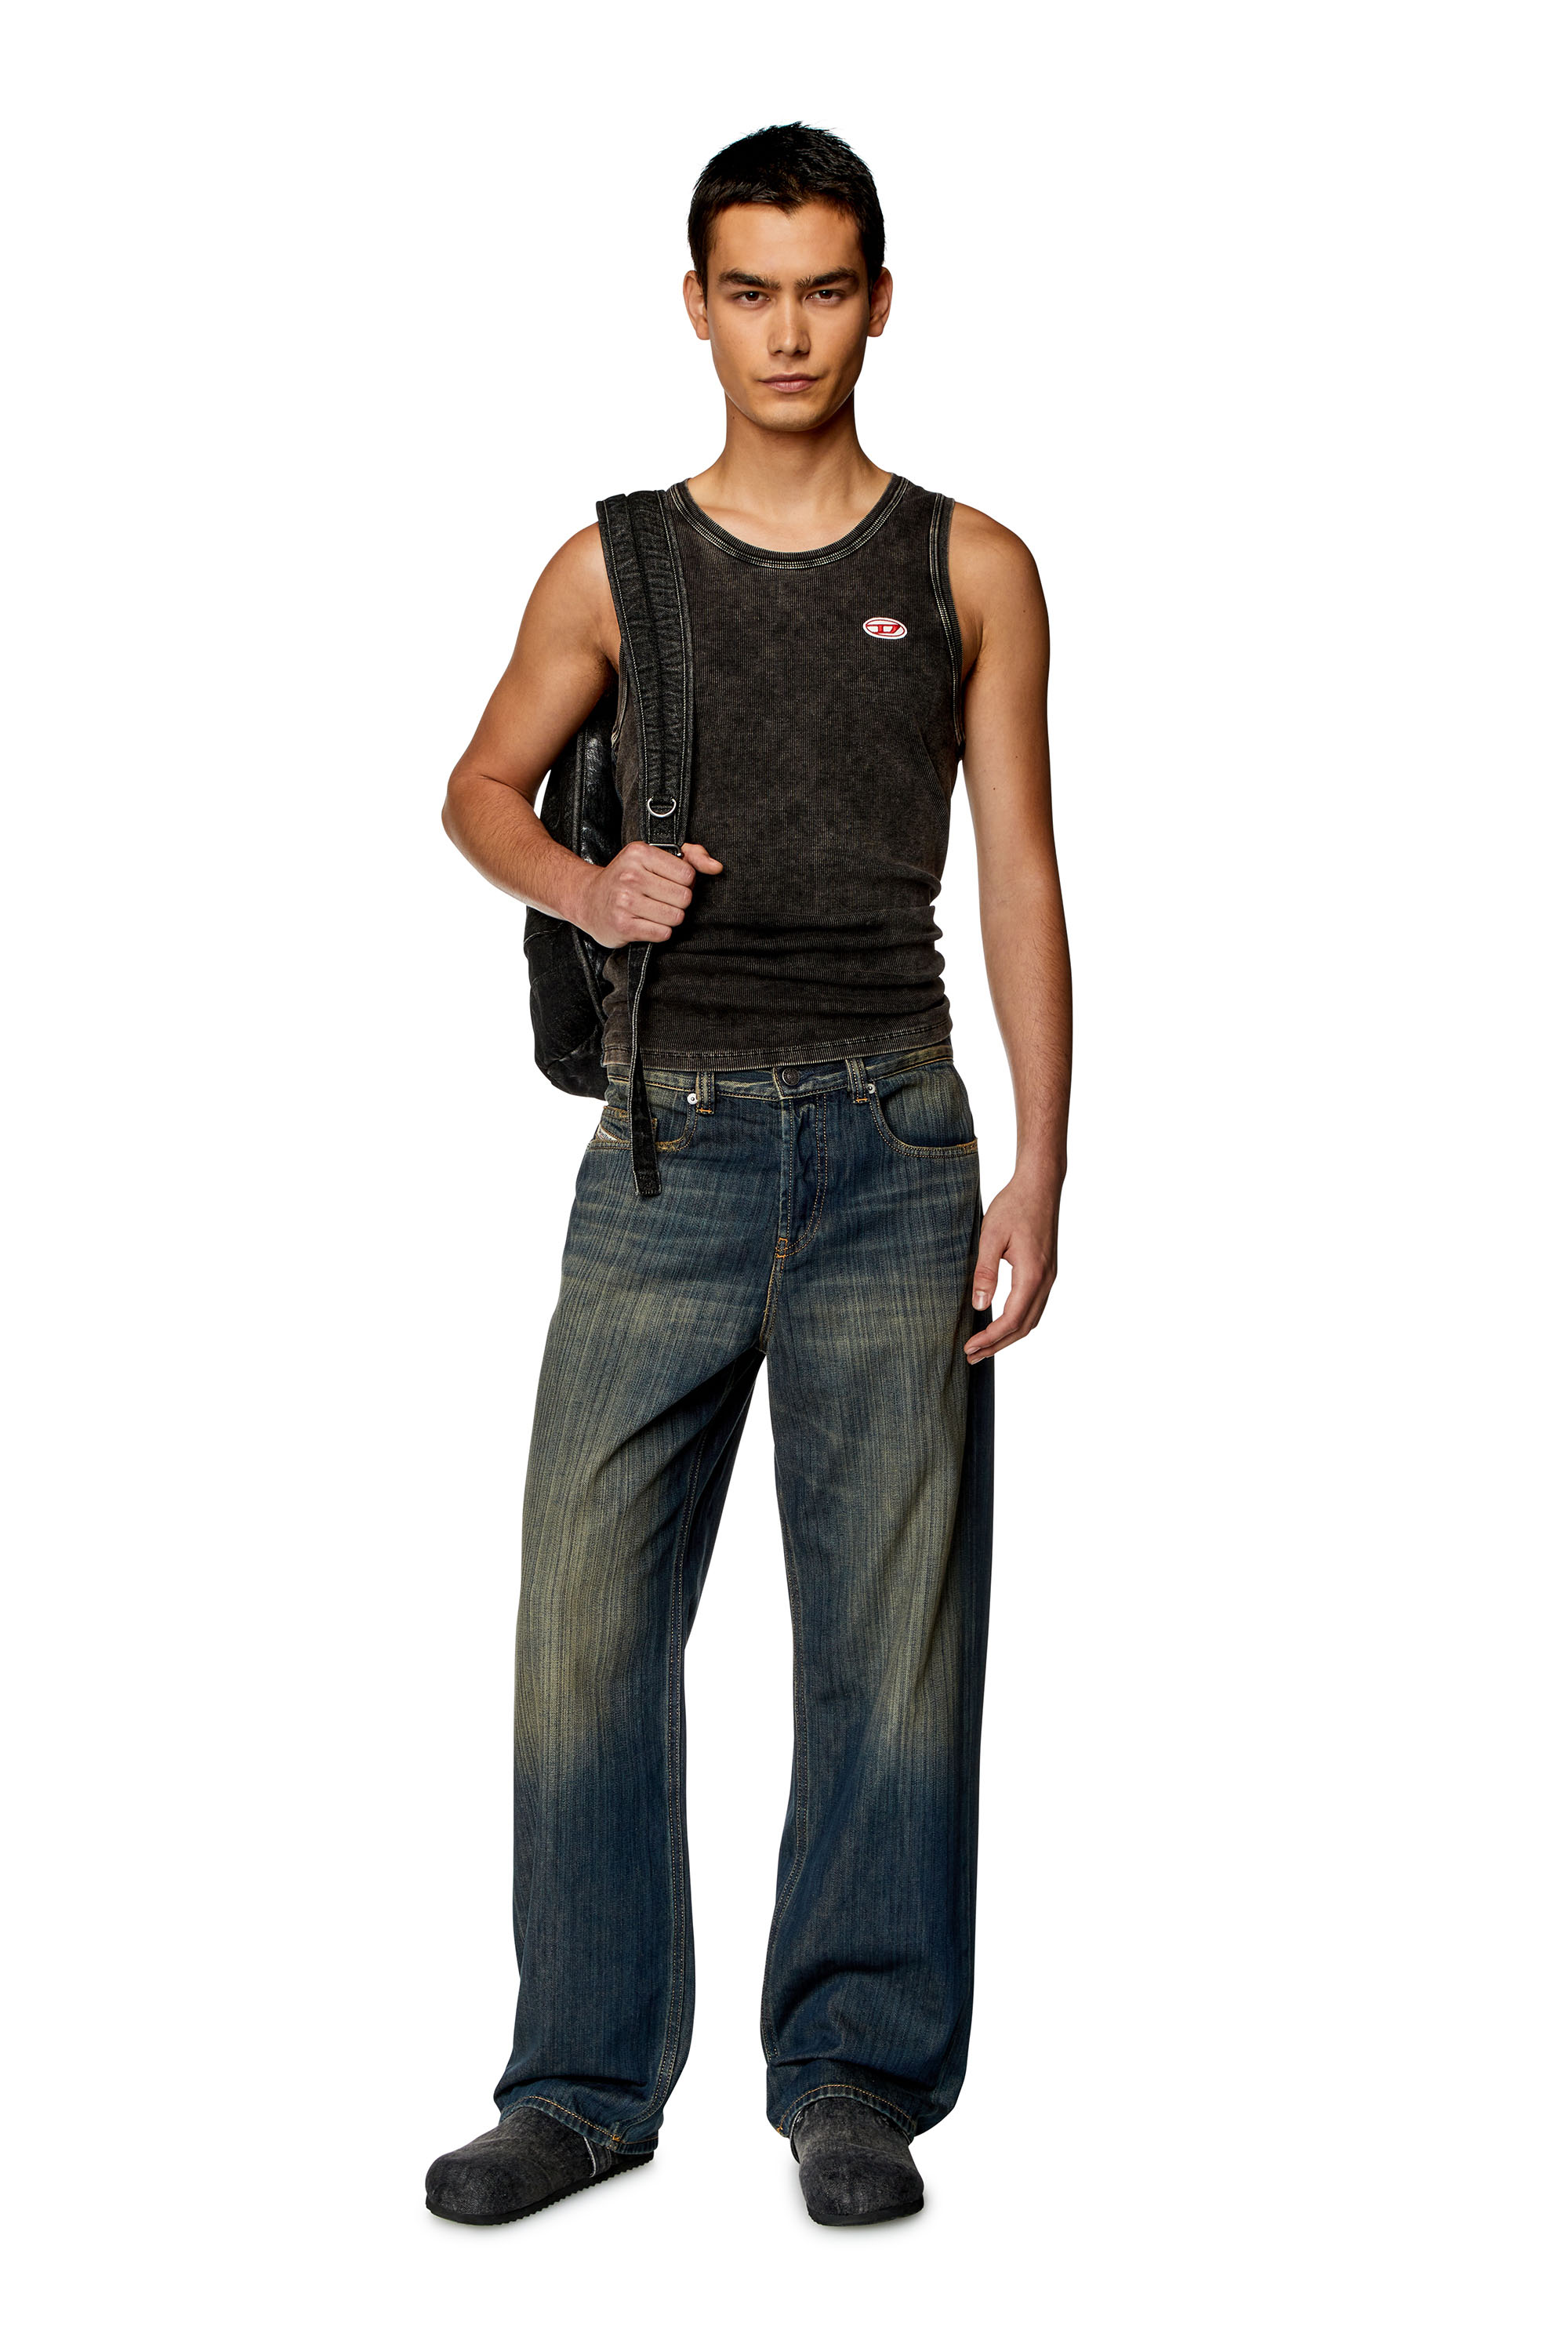 Men's Straight Fit Jeans: Straight cut, loose fit